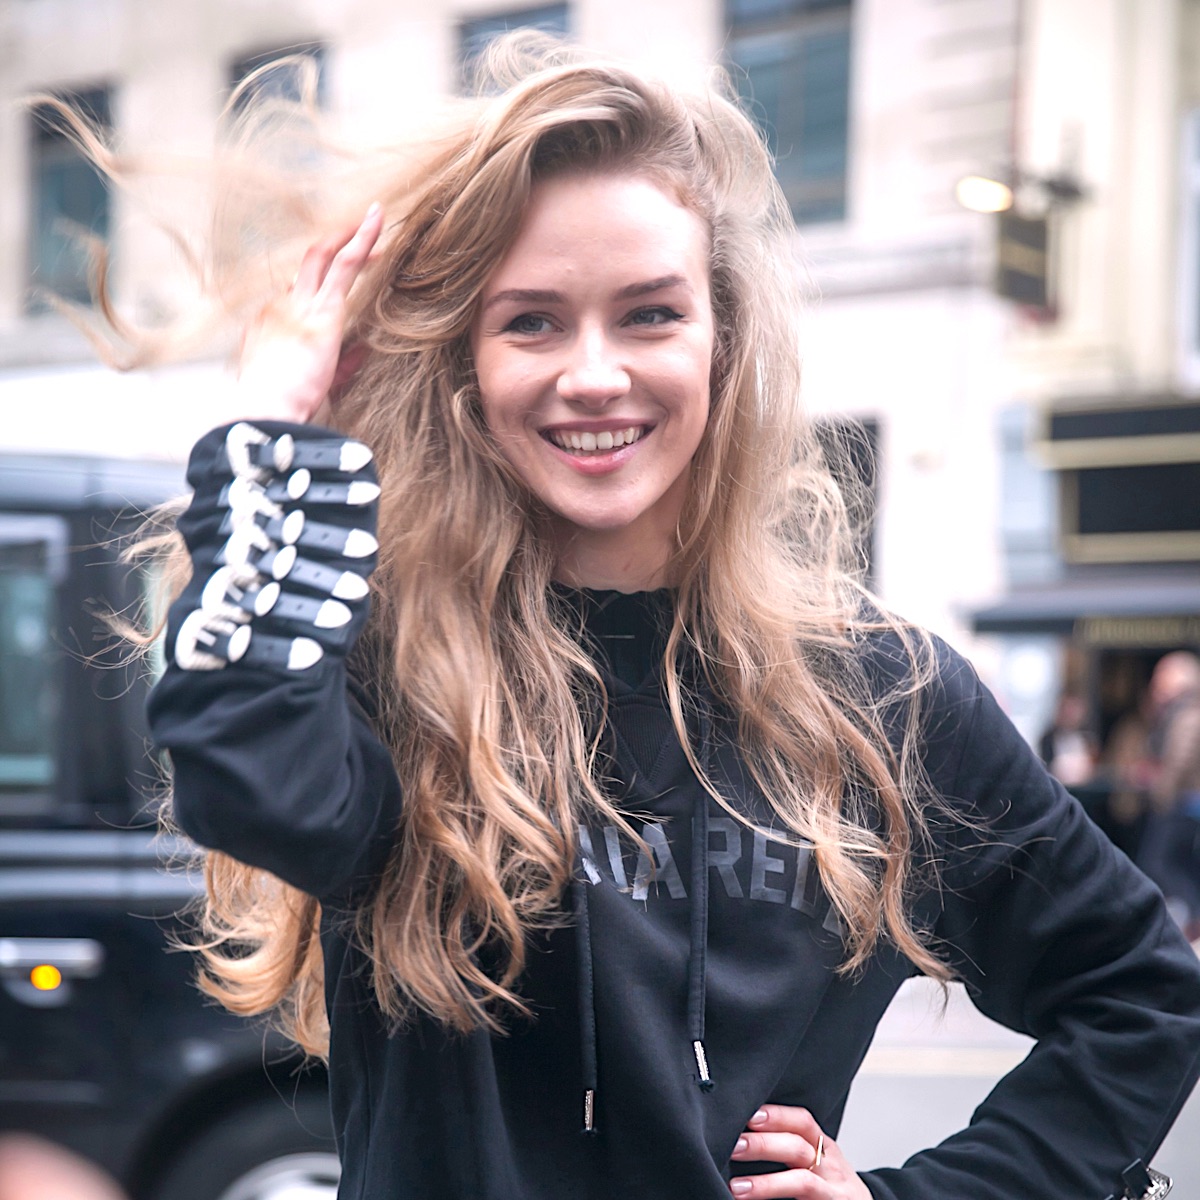 young woman with long hair, wearing all black outfit